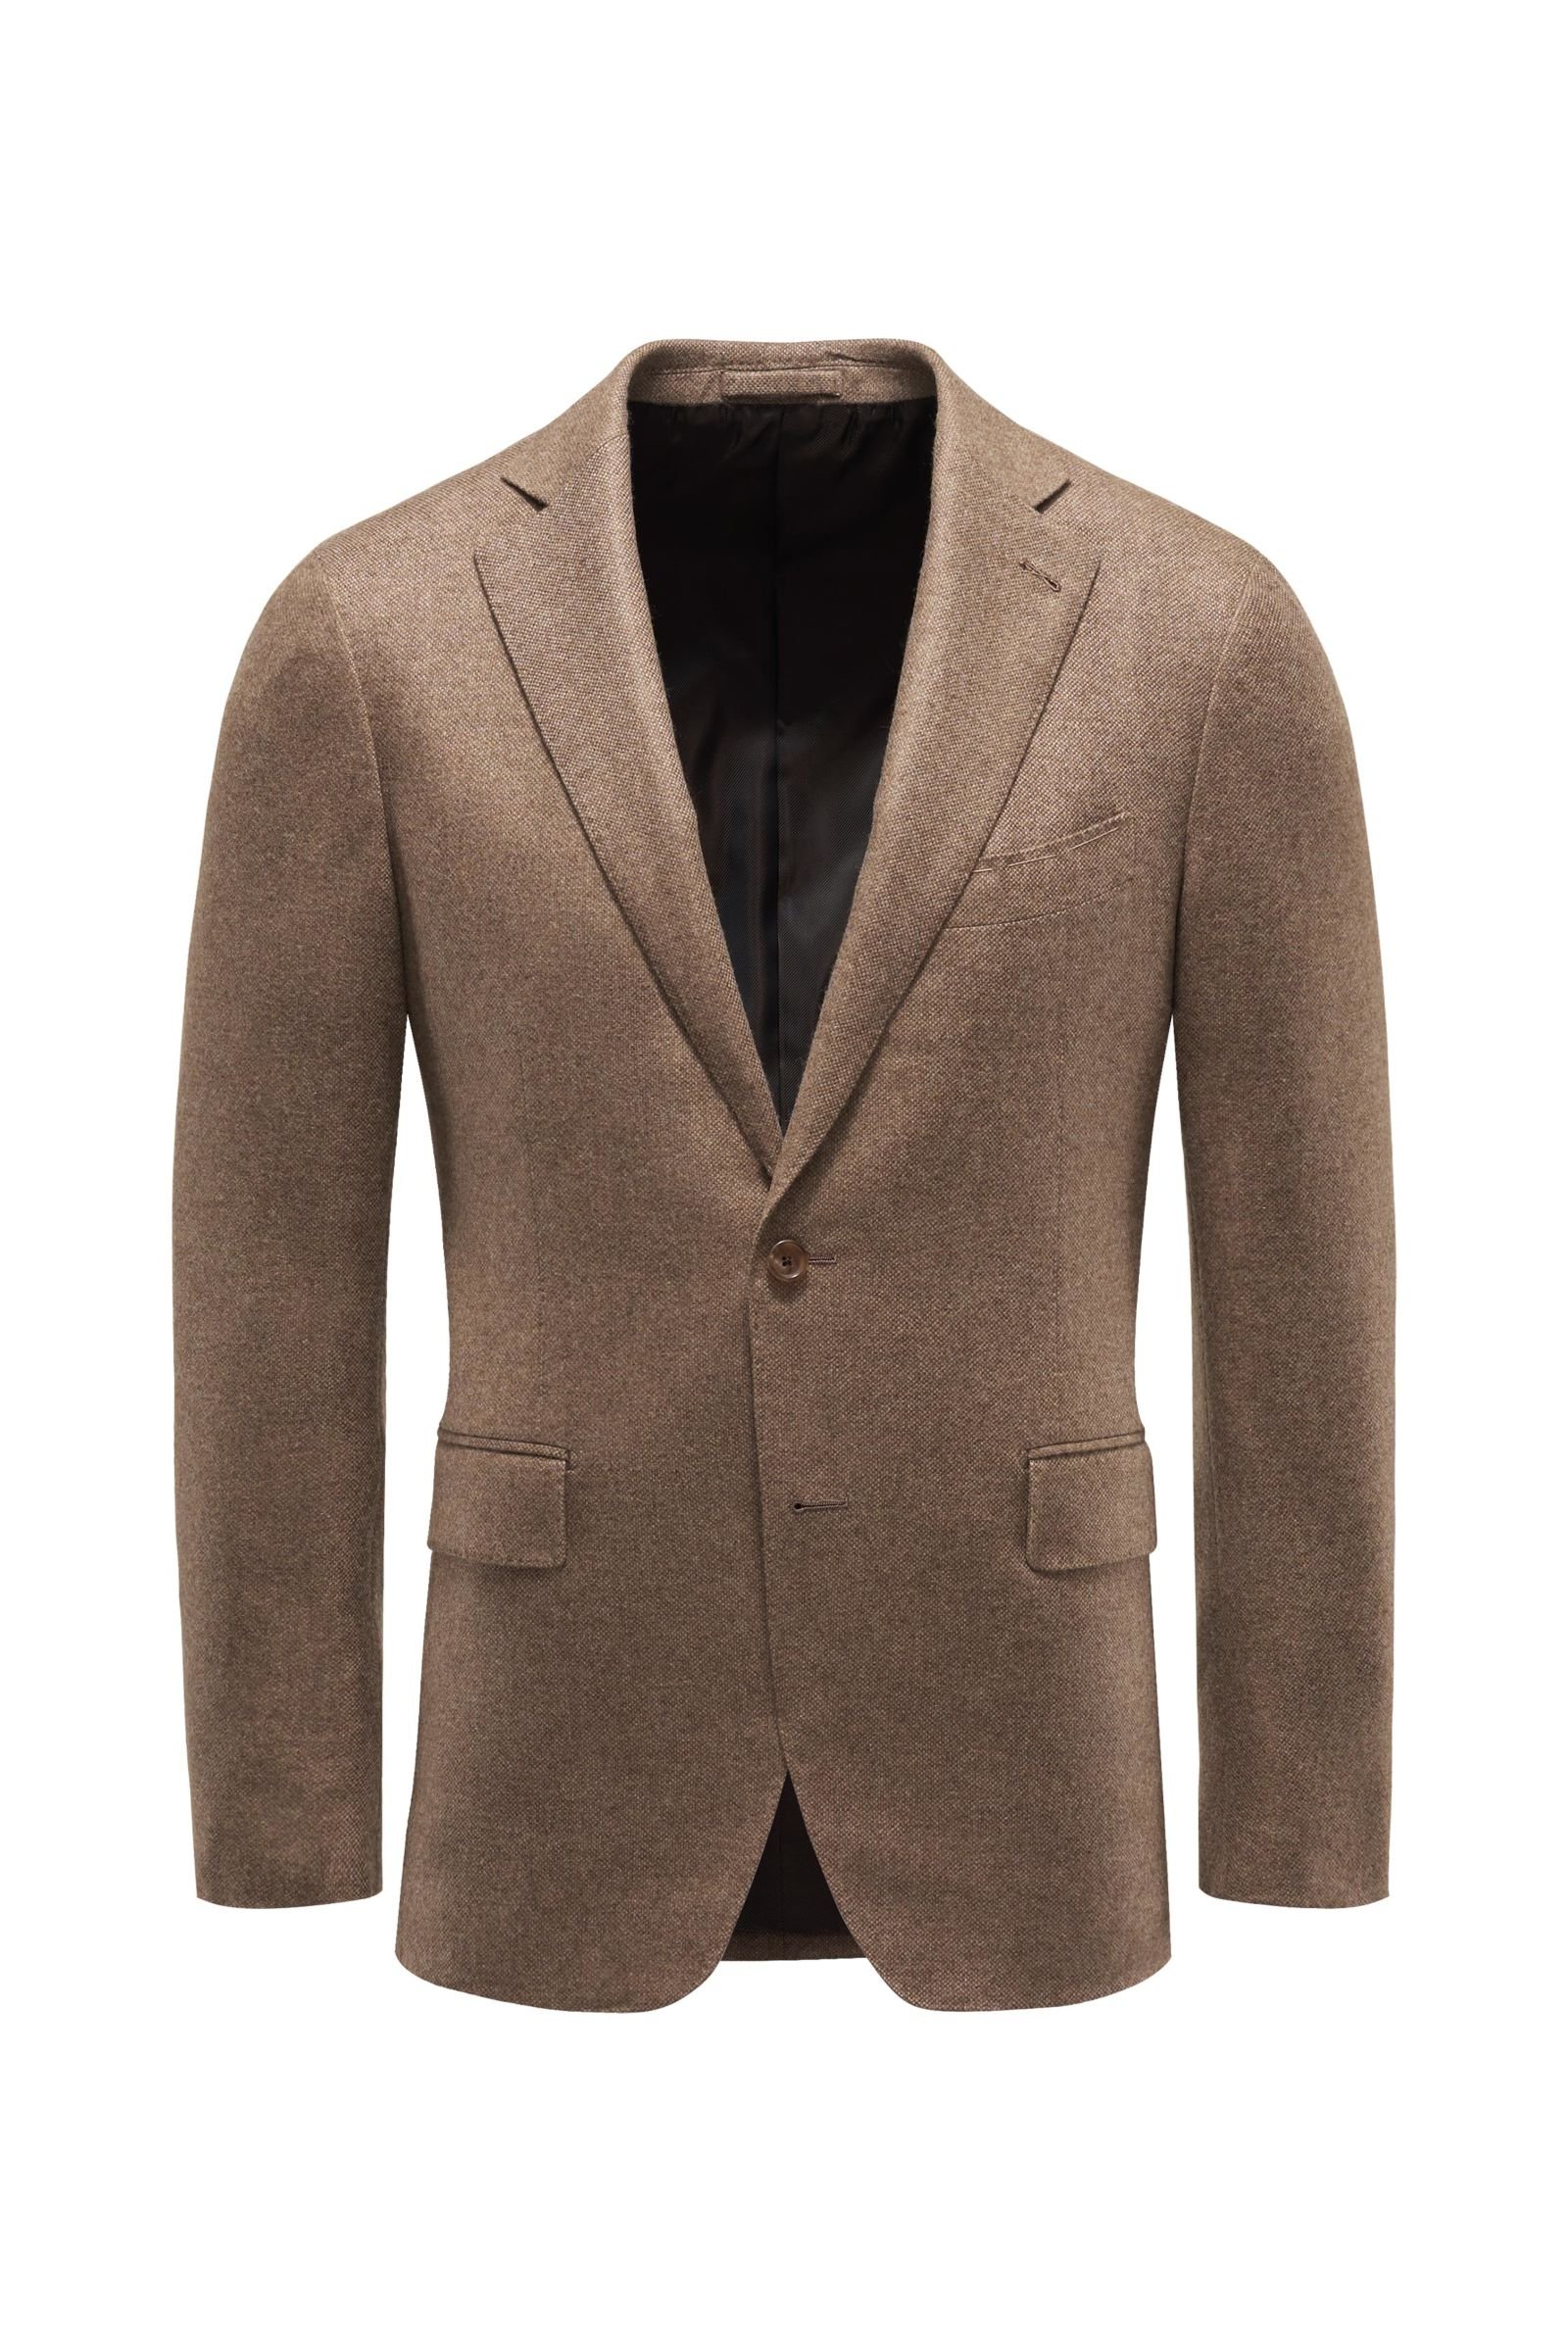 Cashmere smart-casual jacket light brown